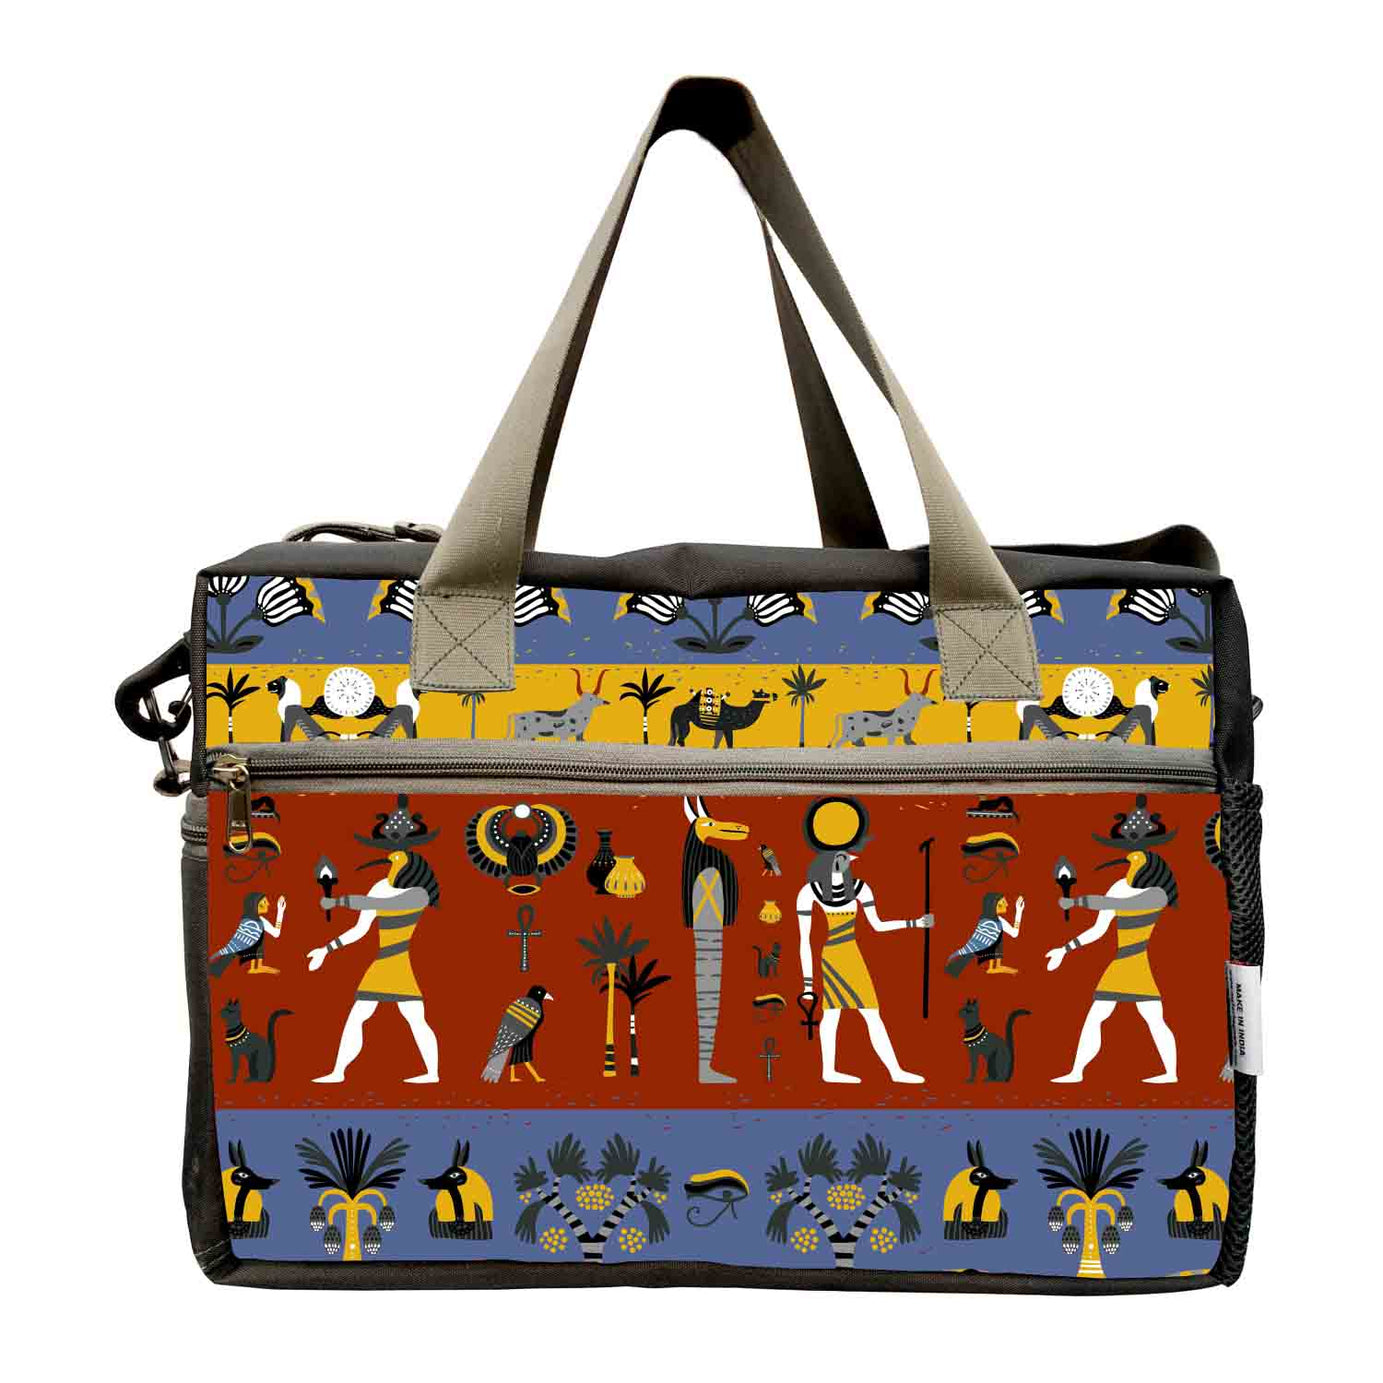 My Fav Traditional Printed Cabin Size Duffle Travel bag for Men Women